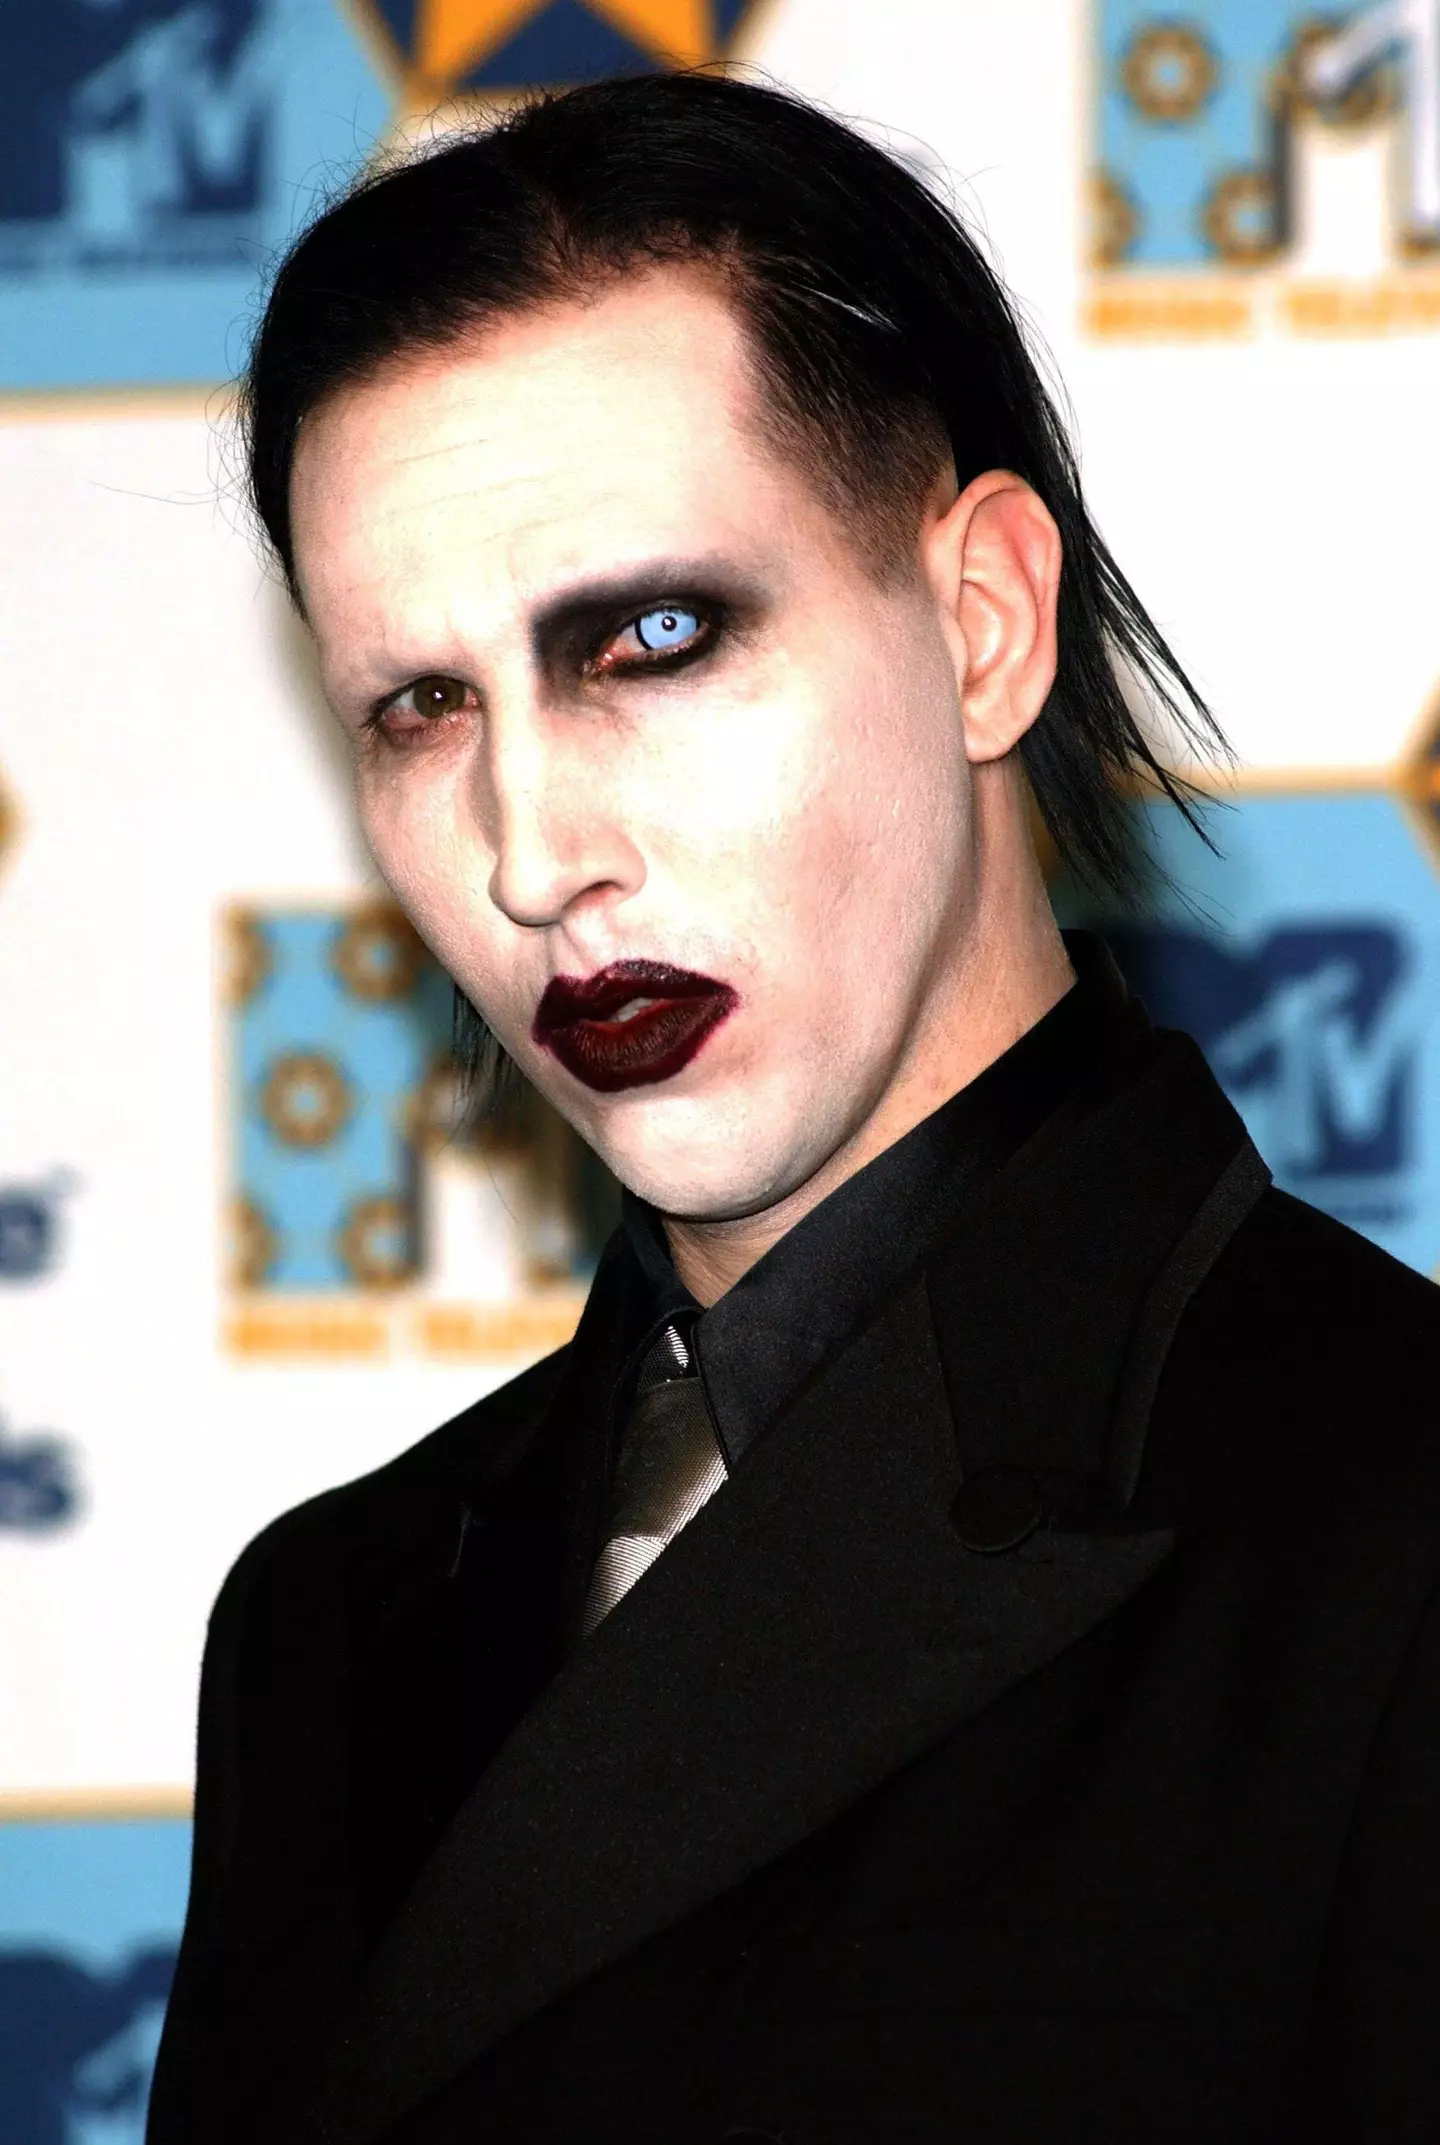 Imagine being too hardcore for Marilyn Manson.